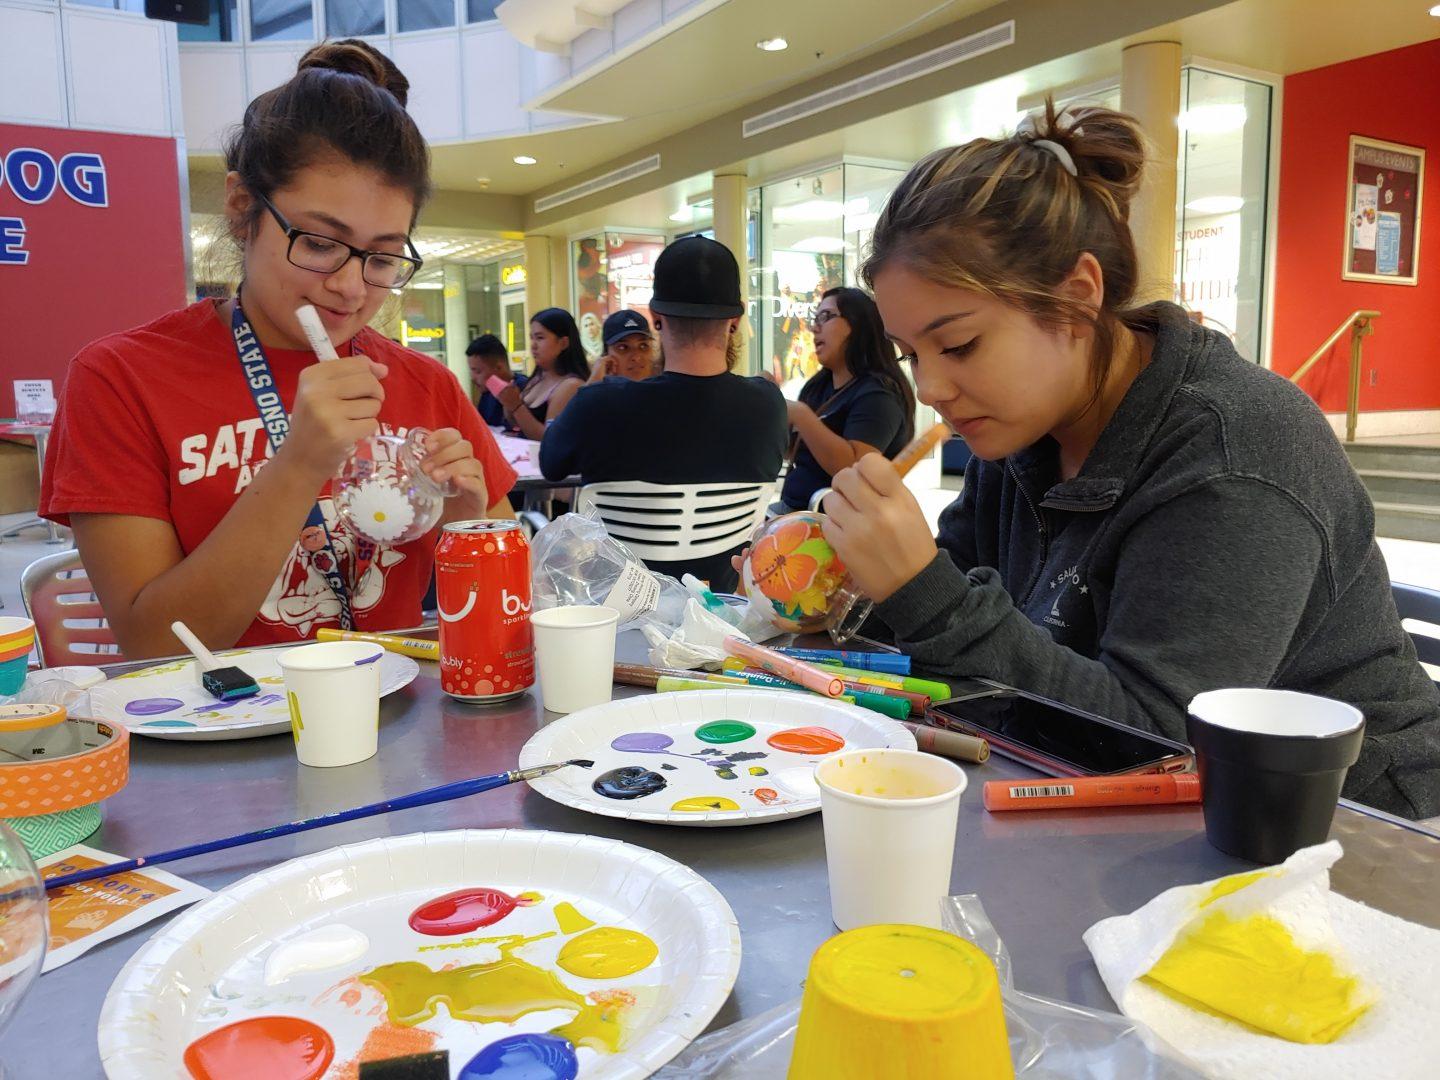 Student participants Jocelyn Ramirez (left) and Jackalene Viranco (right) use various colors of paint as they focus on the details for their designed gumball machines during University Student Union Productions Crafts Night at the lower level of the University Student Union on Tuesday, Sept. 10, 2019. (Jennifer Reyes/The Collegian)